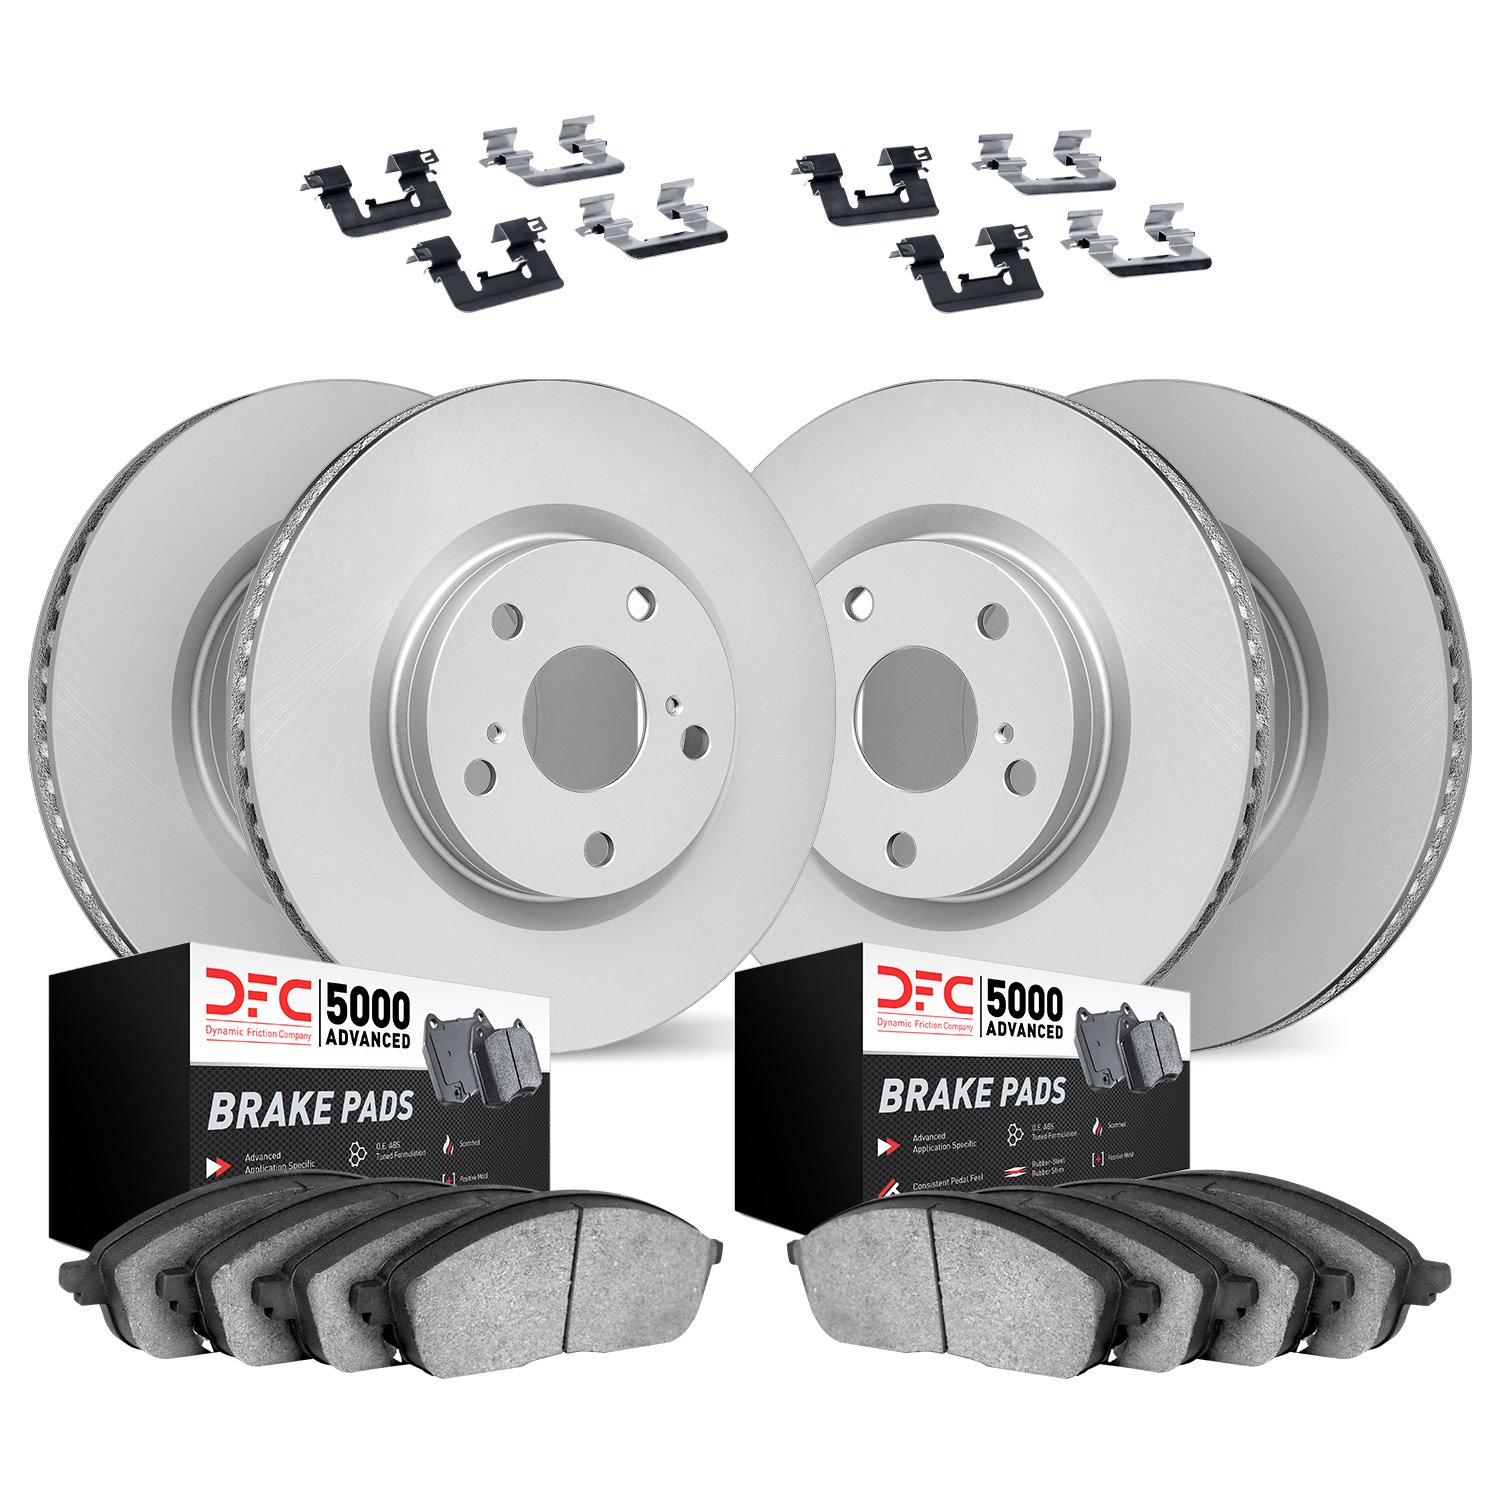 4514-75026 Geospec Brake Rotors w/5000 Advanced Brake Pads Kit & Hardware, Fits Select Lexus/Toyota/Scion, Position: Front and R